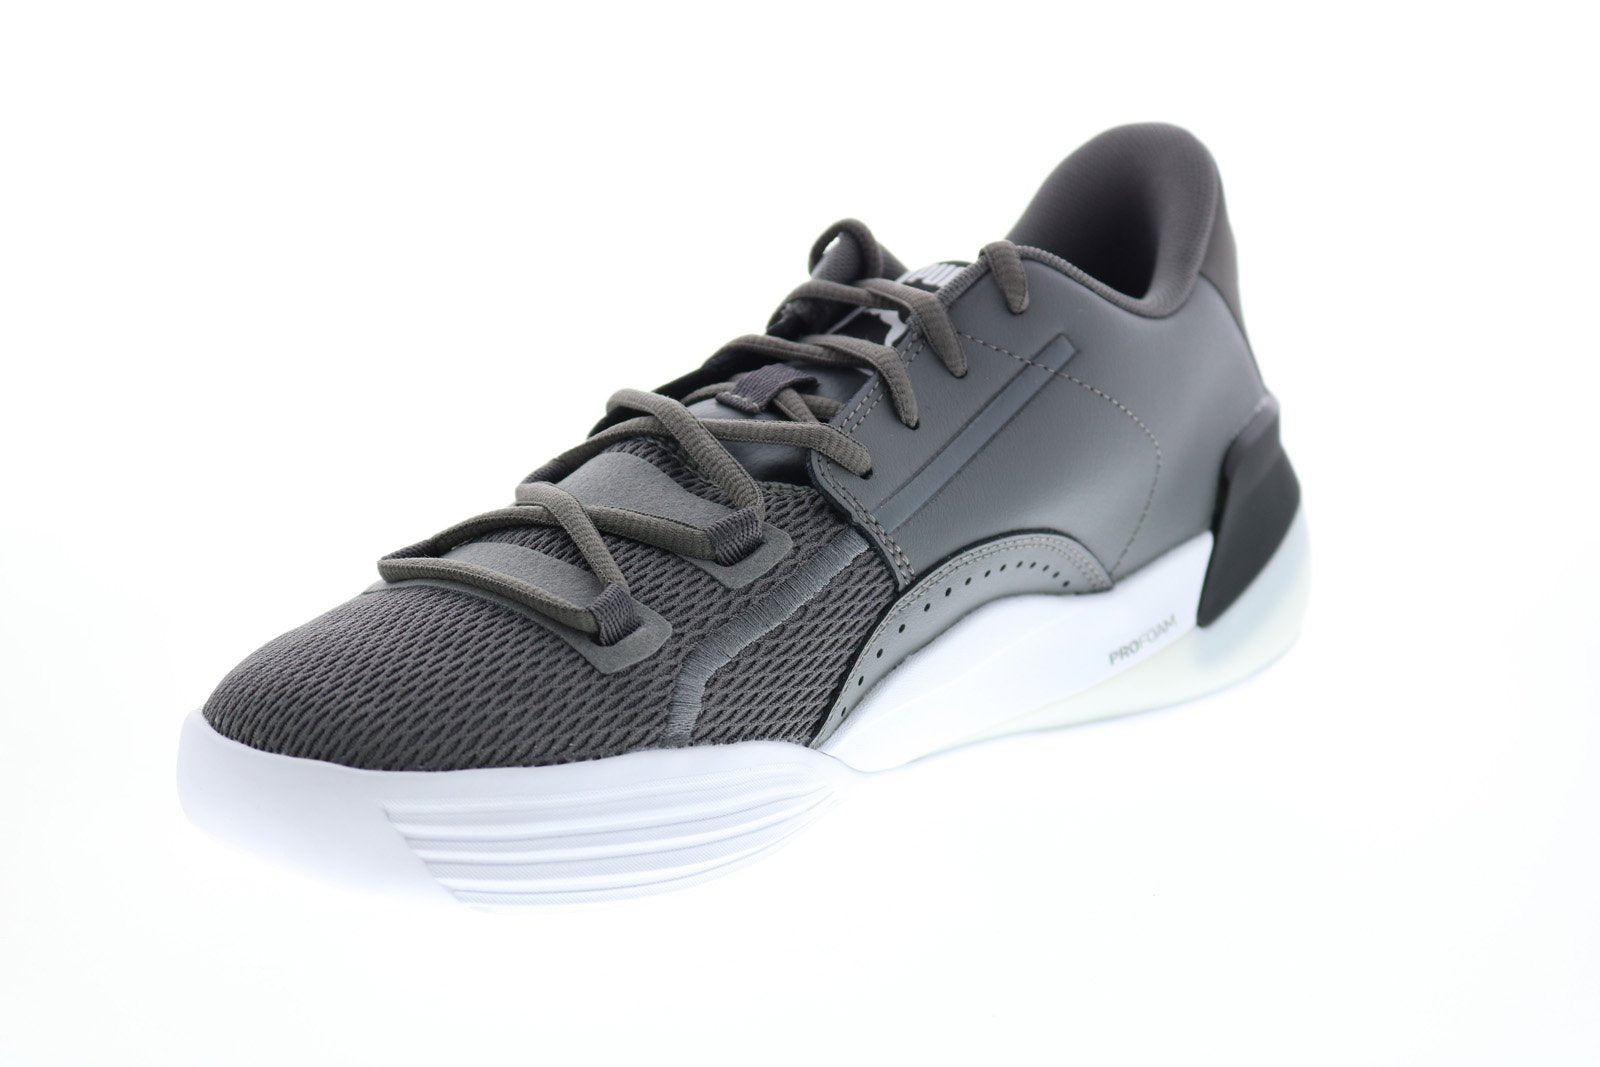 Puma Clyde Hardwood Team 19445403 Mens Gray Athletic Basketball Shoes ...